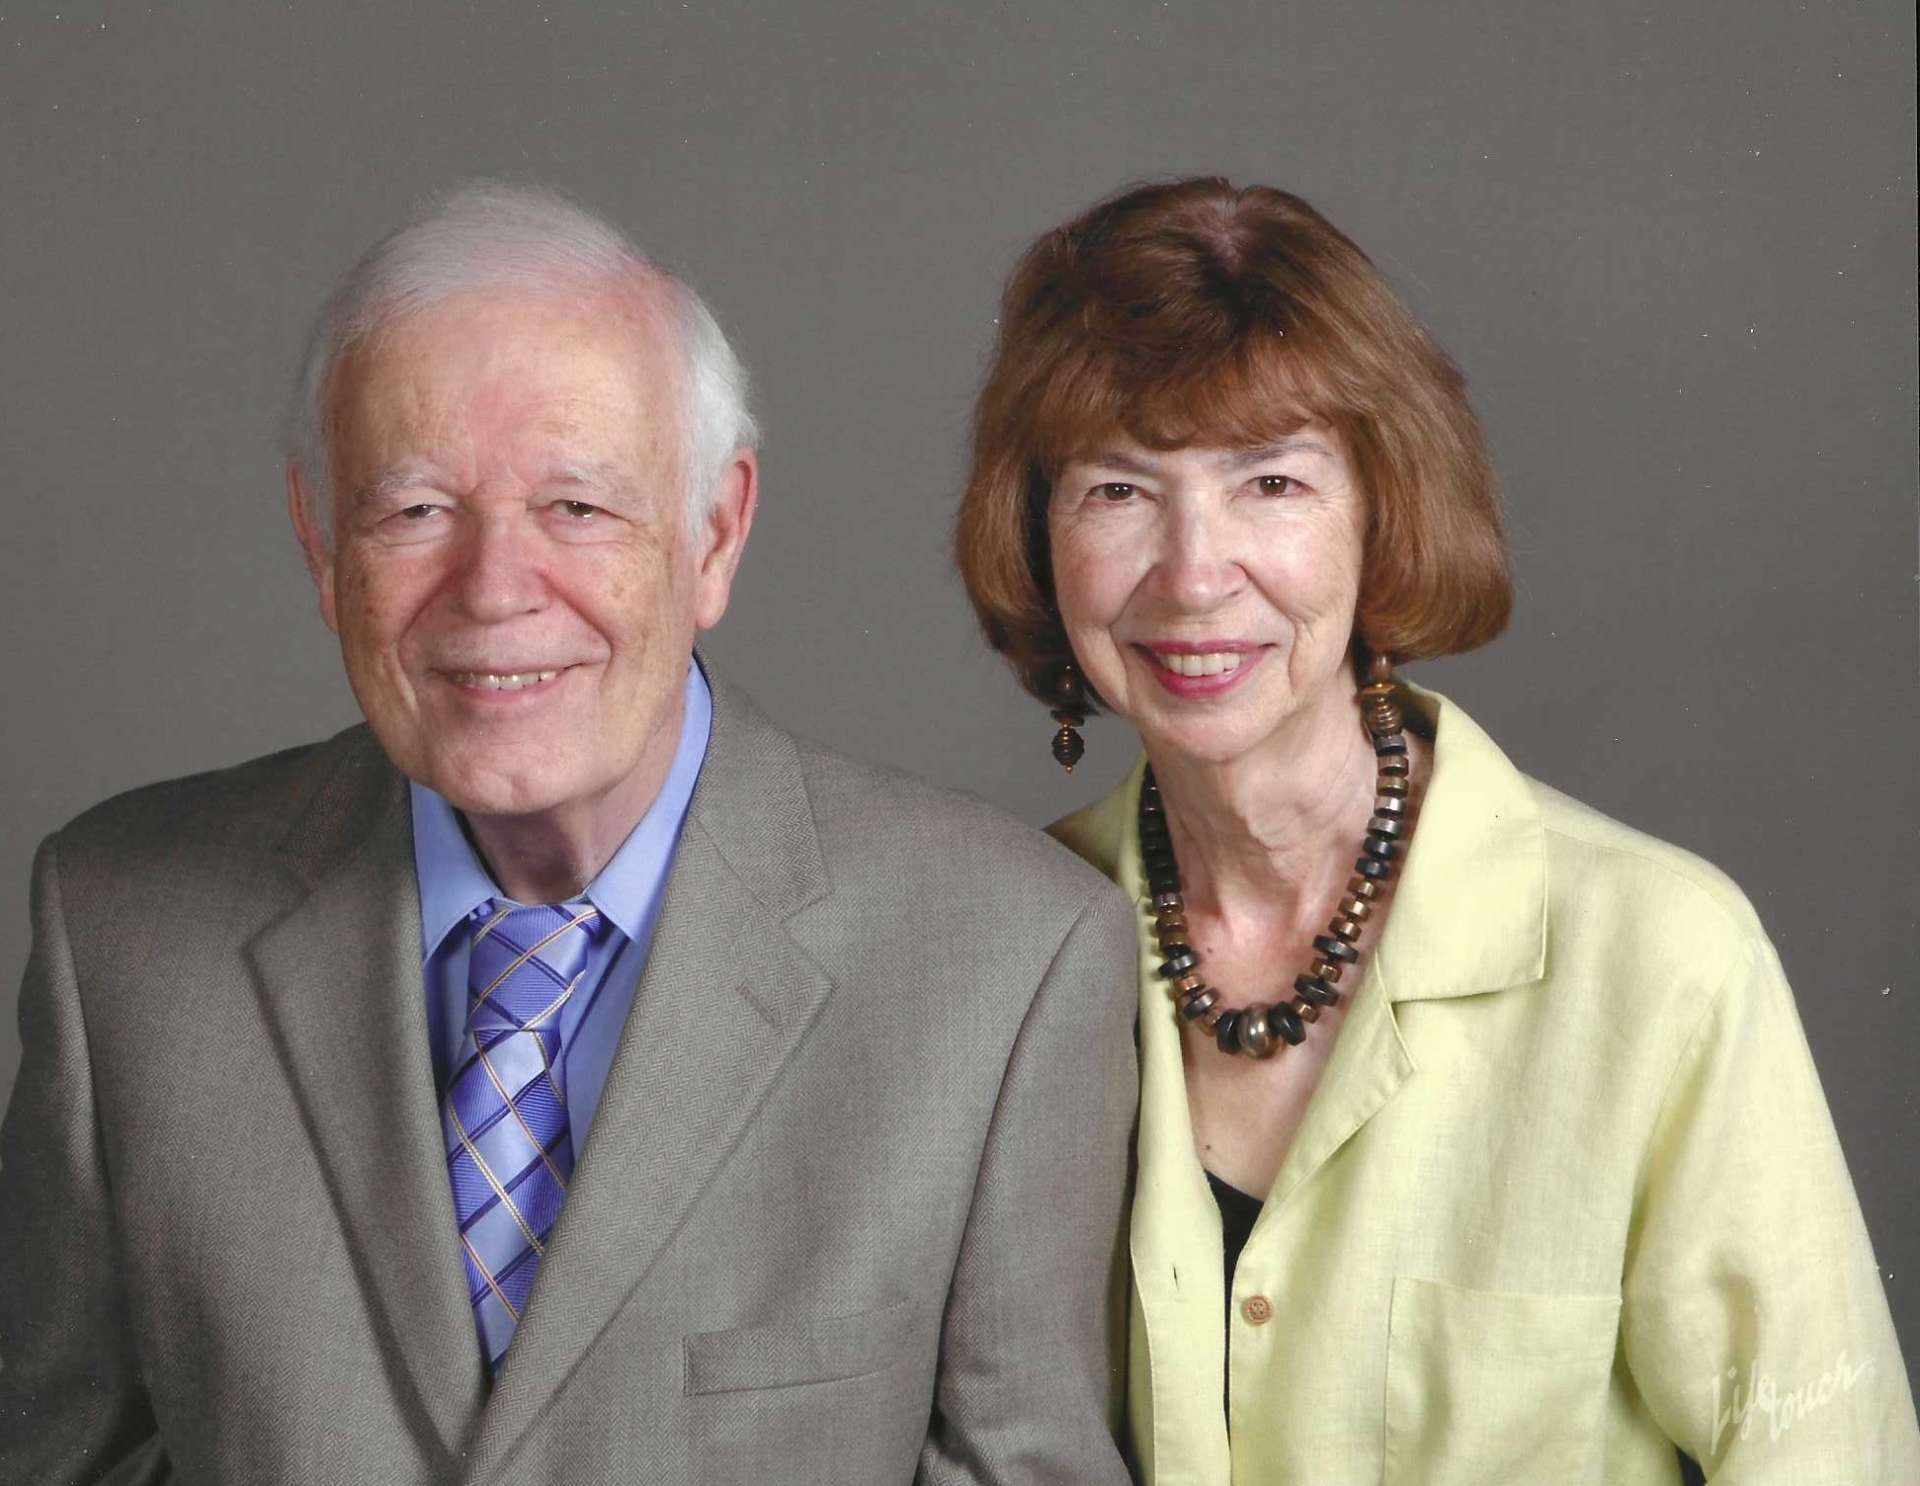 Photo of Jack and Pat Egle standing together, dressed nicely, smiling and looking at the camera.